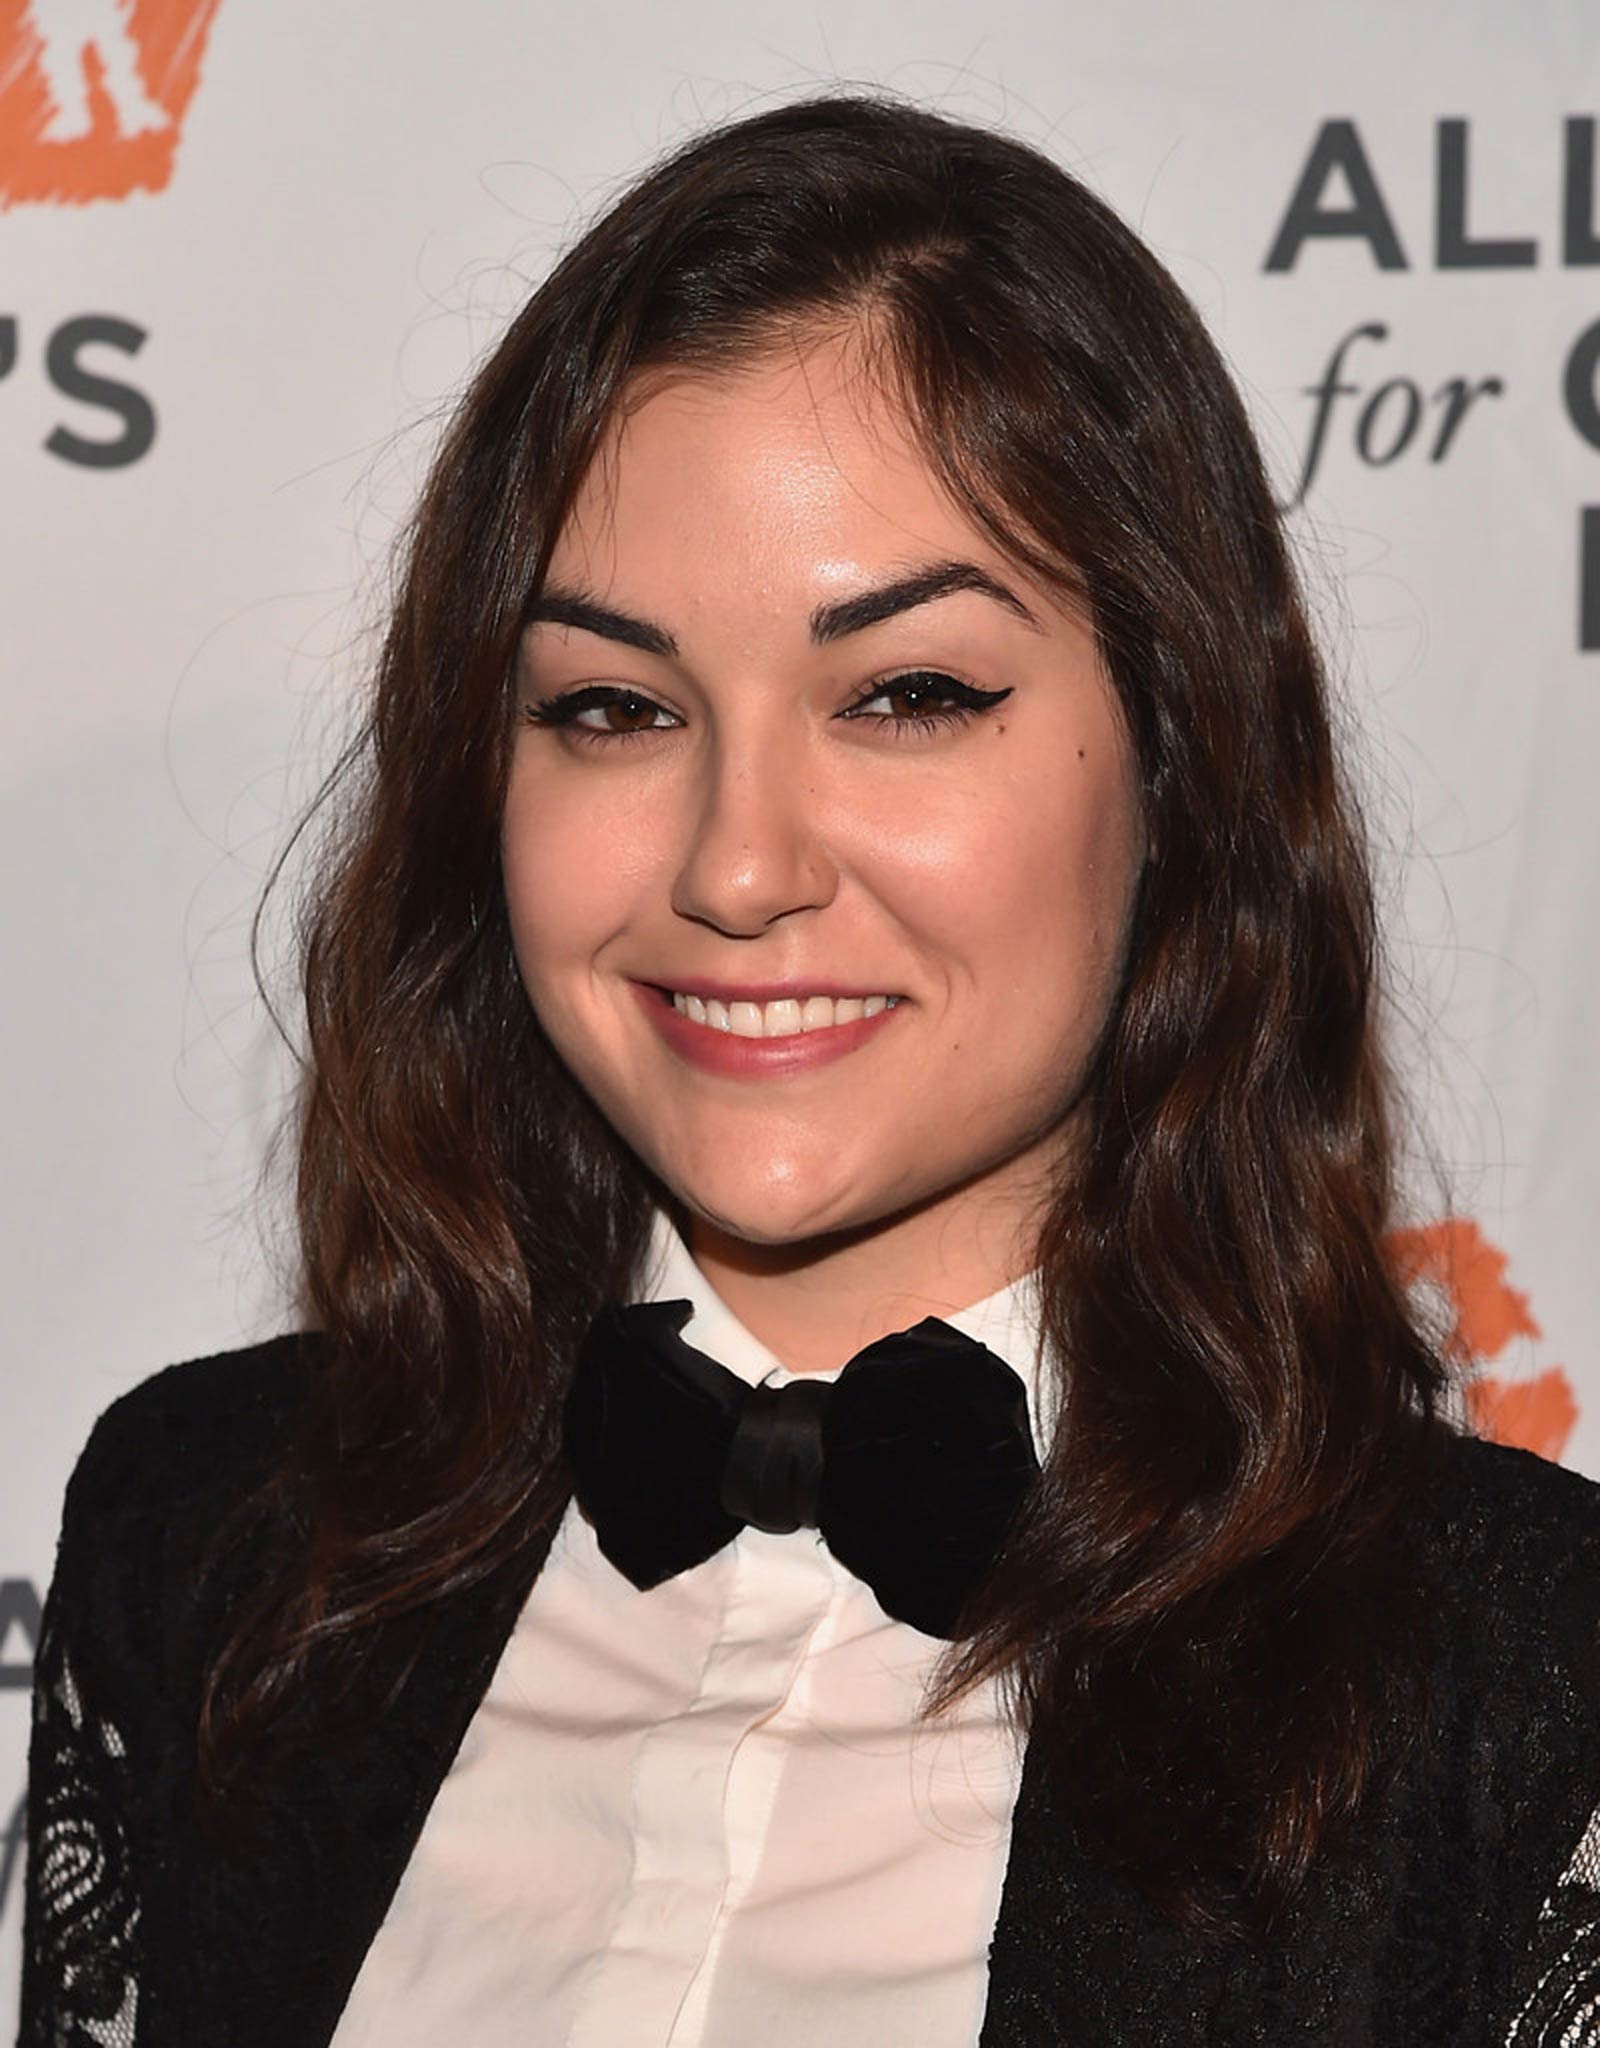 Sasha Grey attends The Alliance For Children’s Rights To Laugh